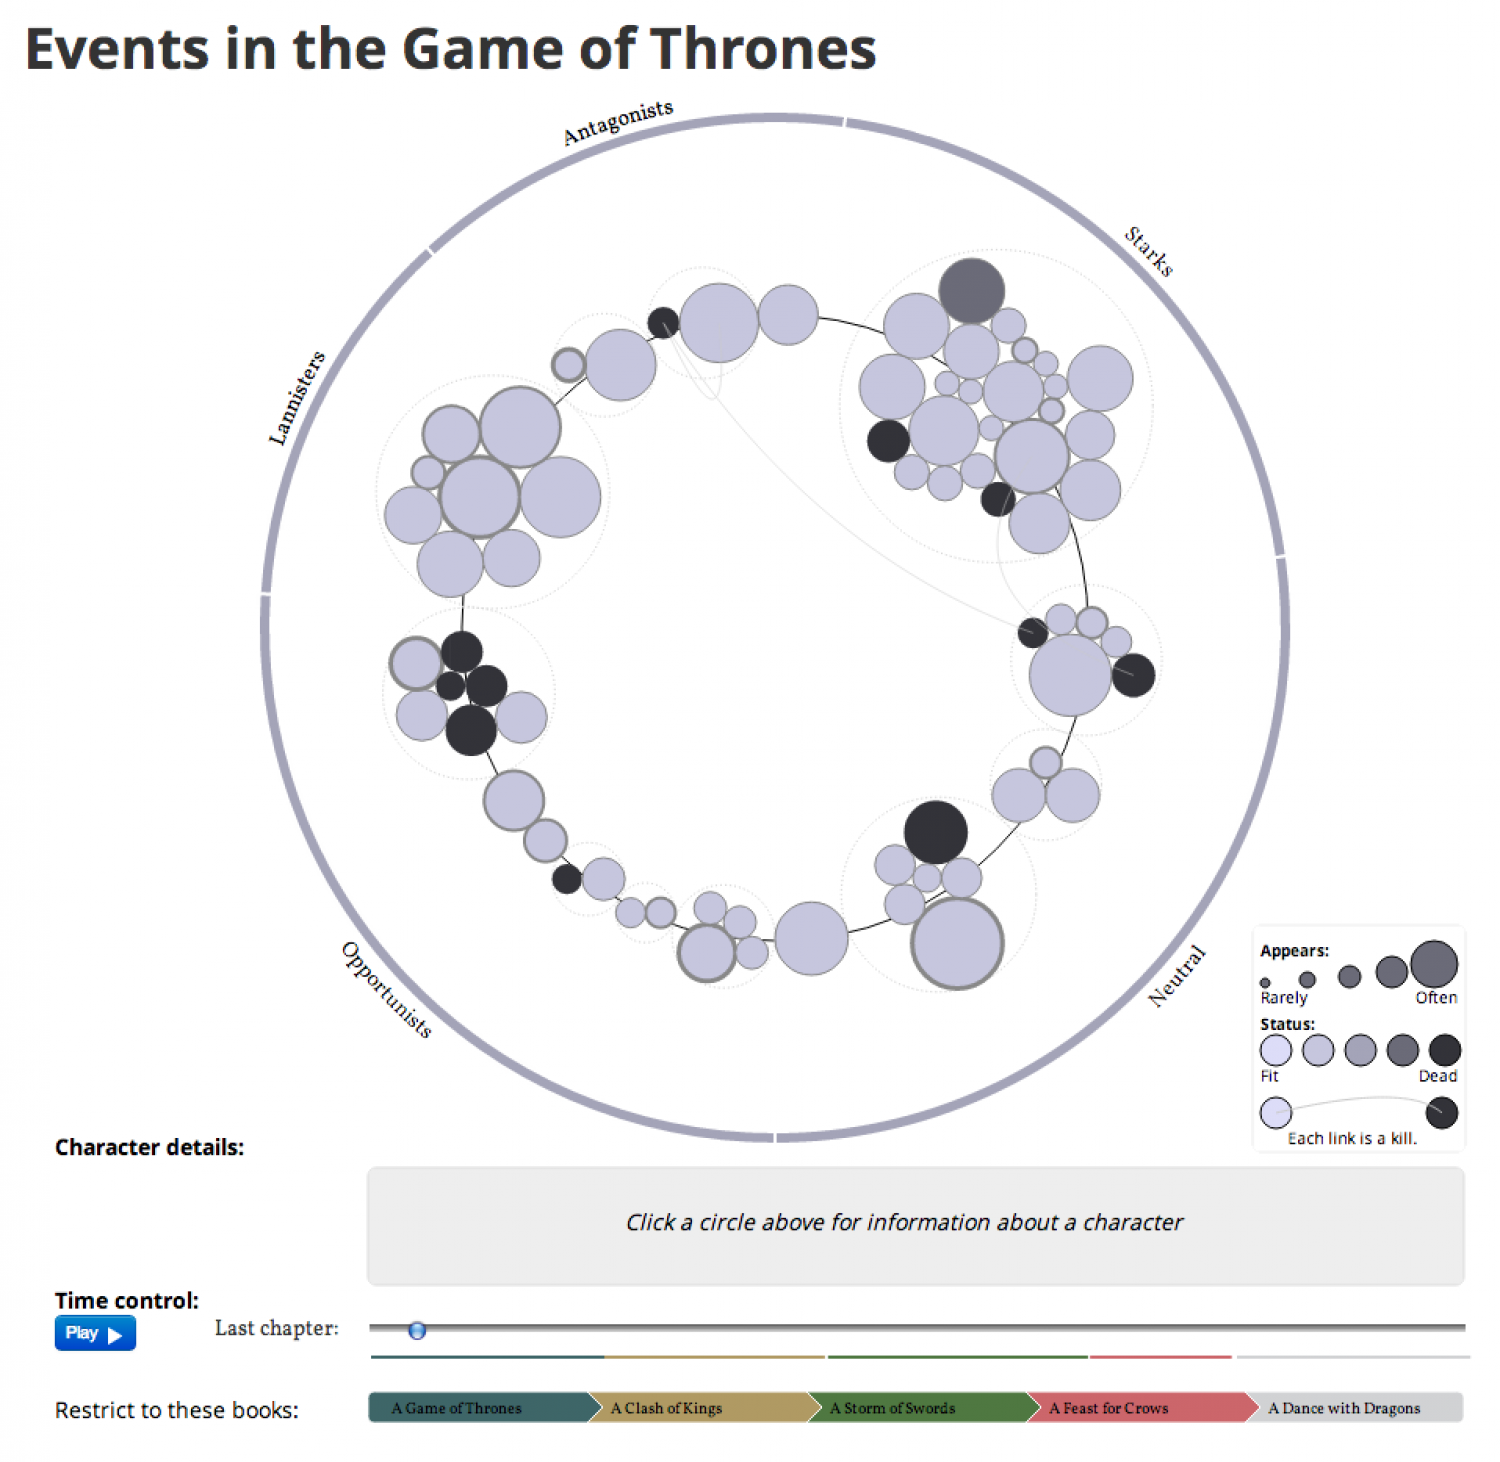 Events in the Game of Thrones Infographic